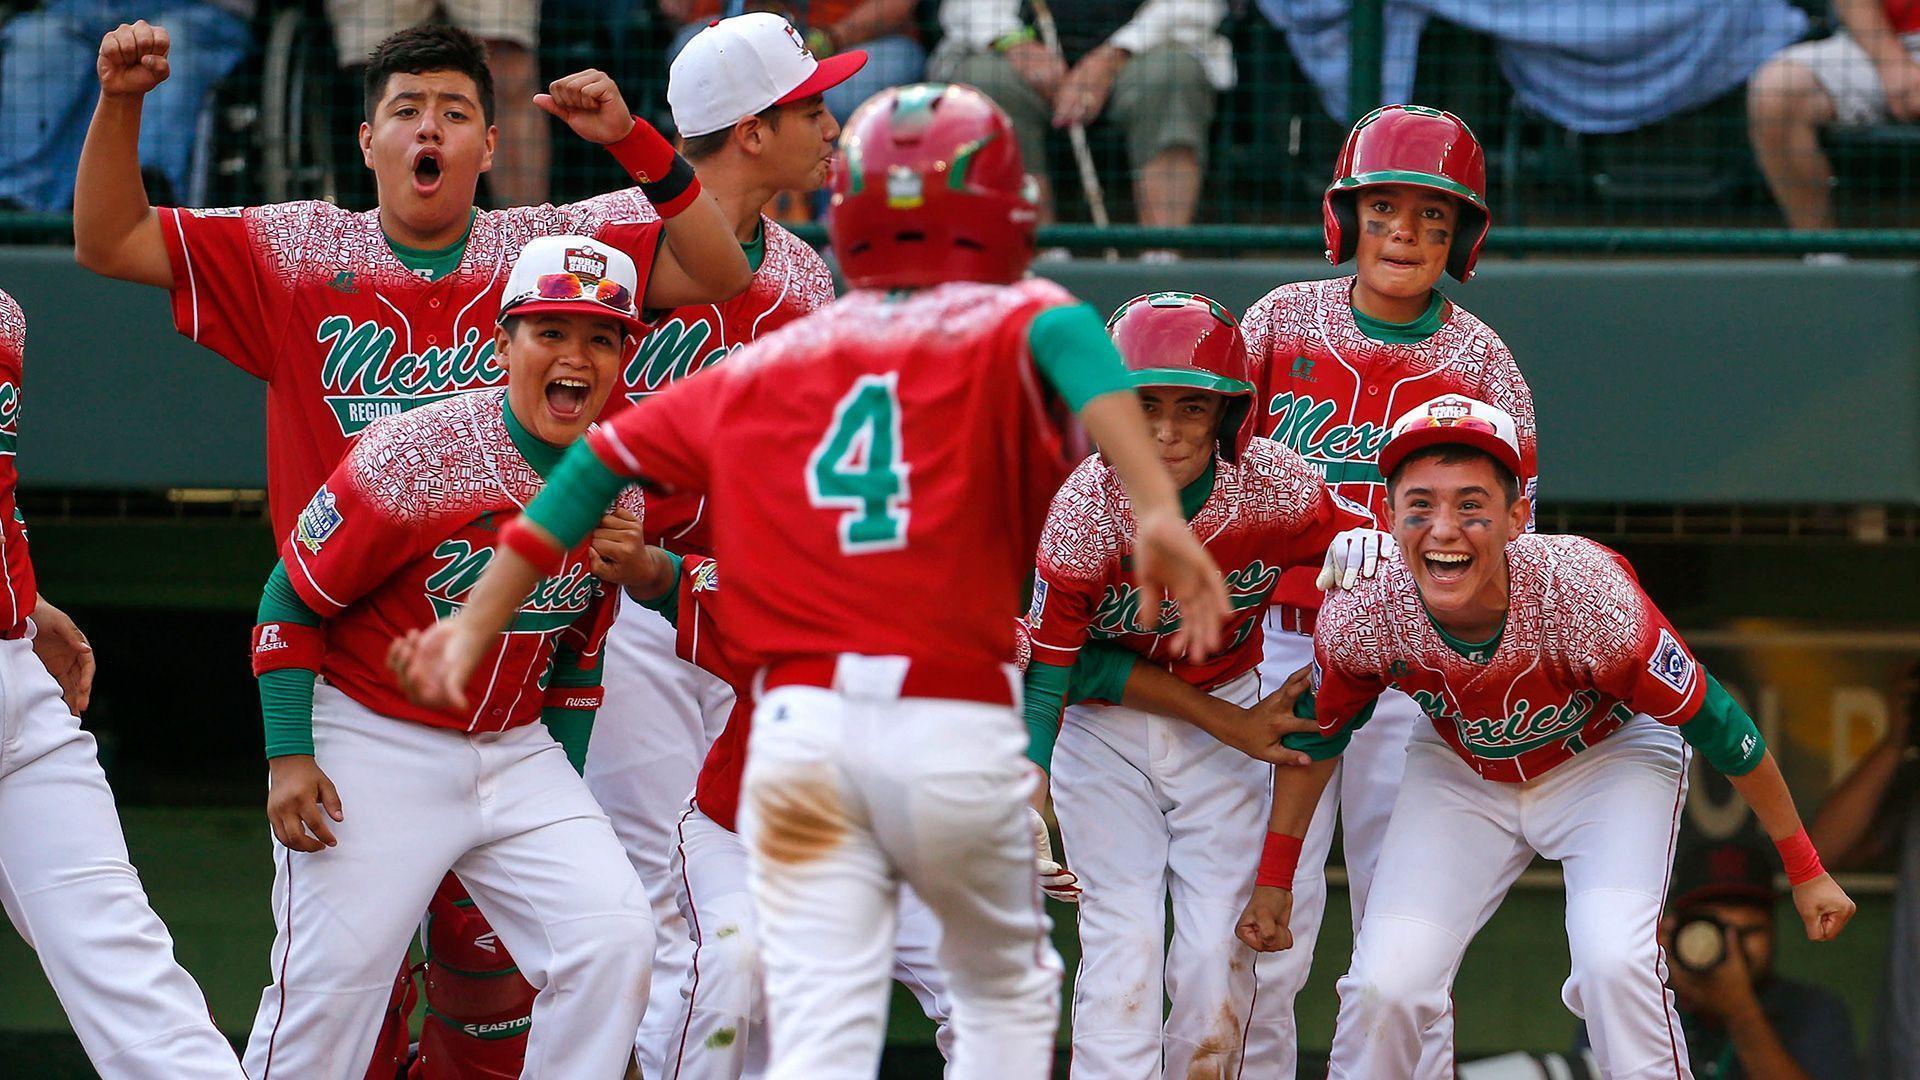 Little League World Series 2015 scores: California, Mexico stay